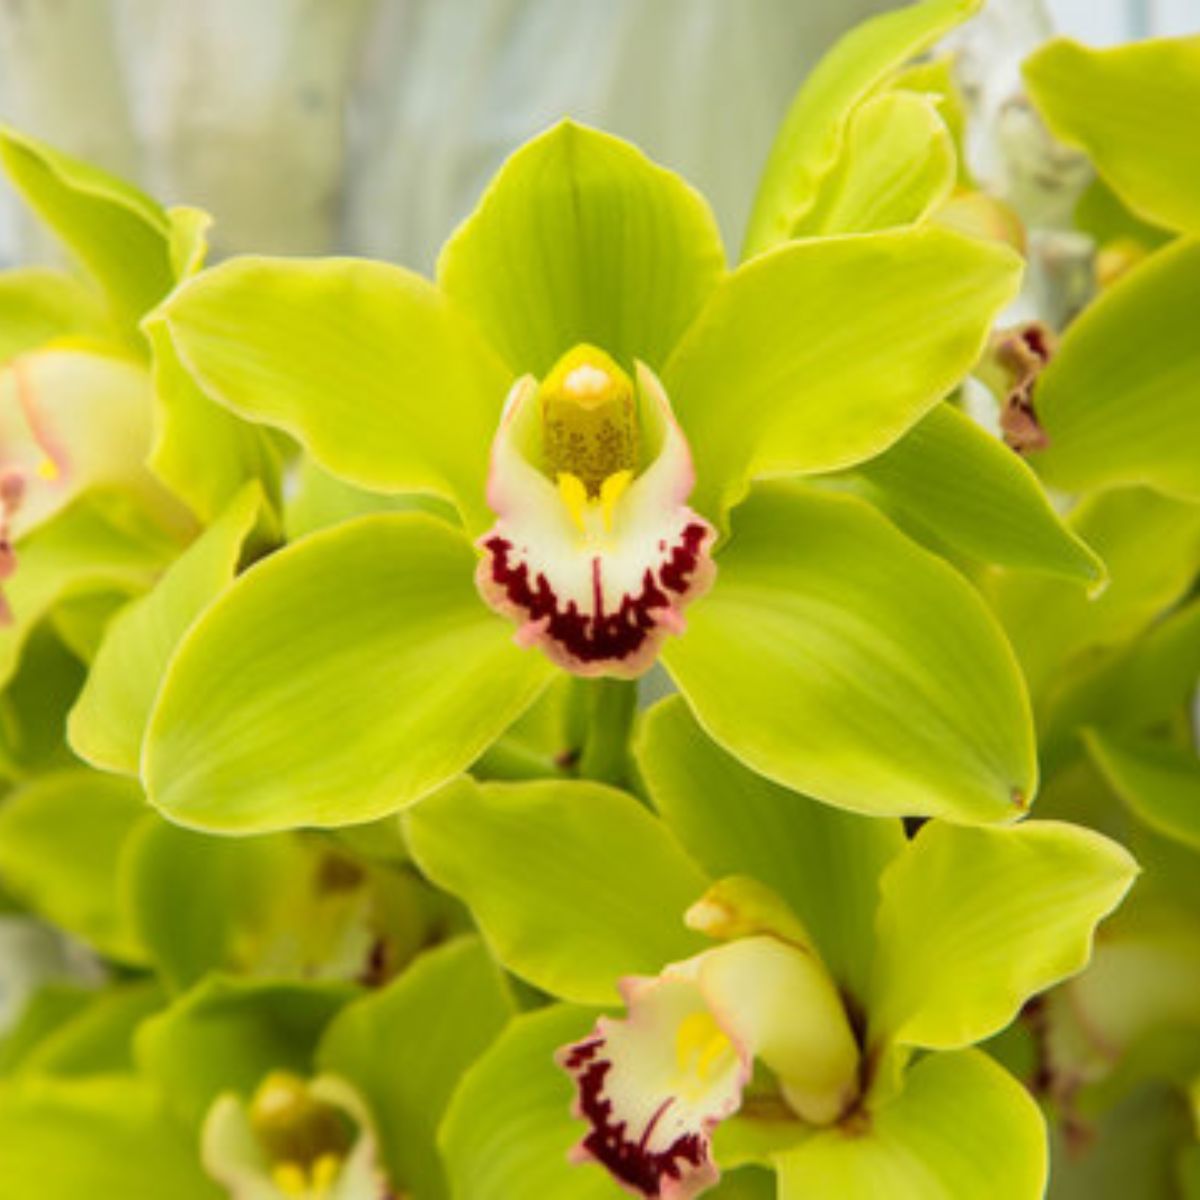 Stunning Cymbidium Green Bart Dutch (Flask) orchid with vibrant green and white petals